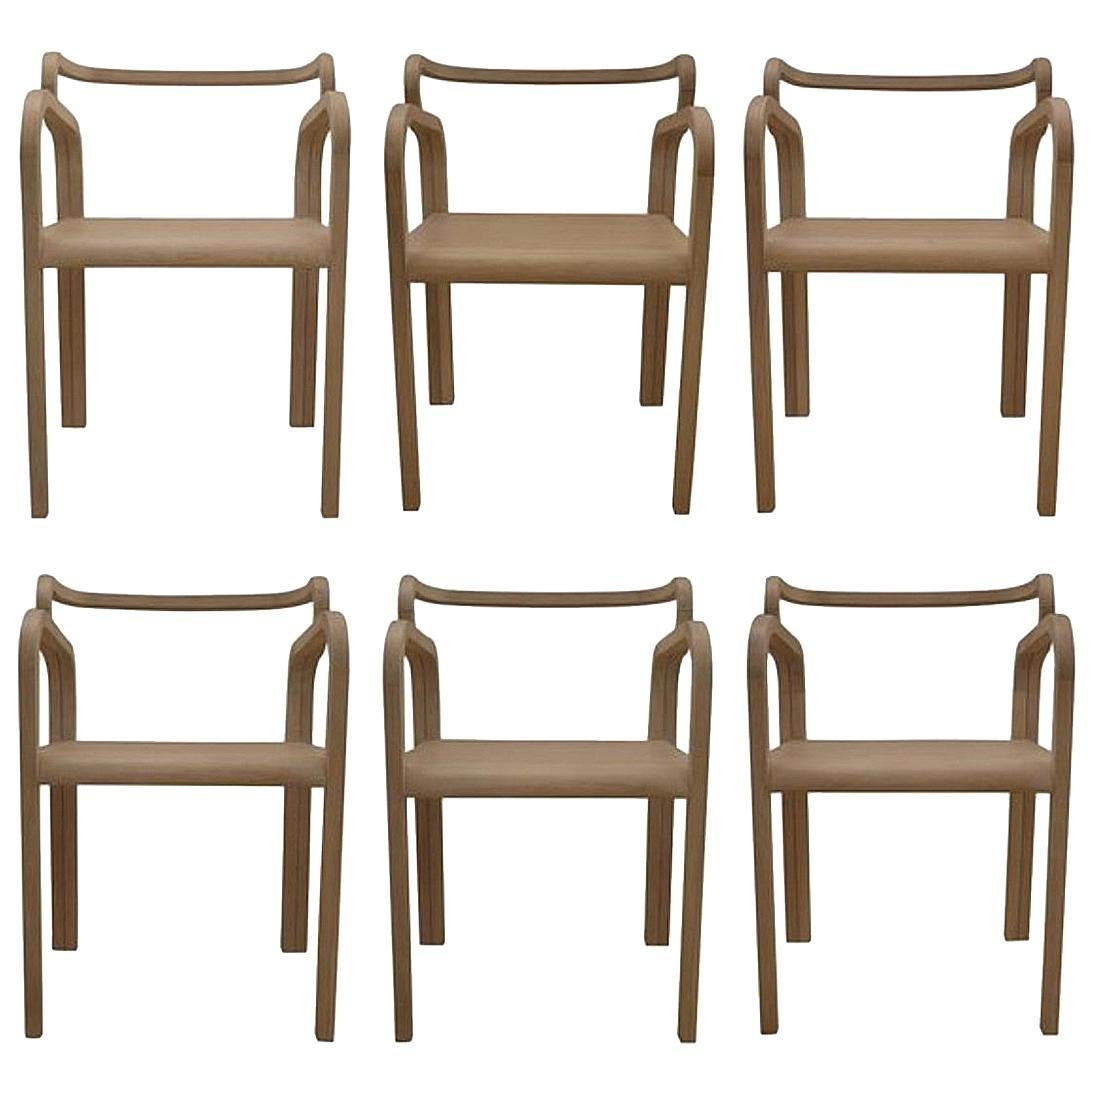 Six Odette Dining Chairs in Oak by Fred&Juul